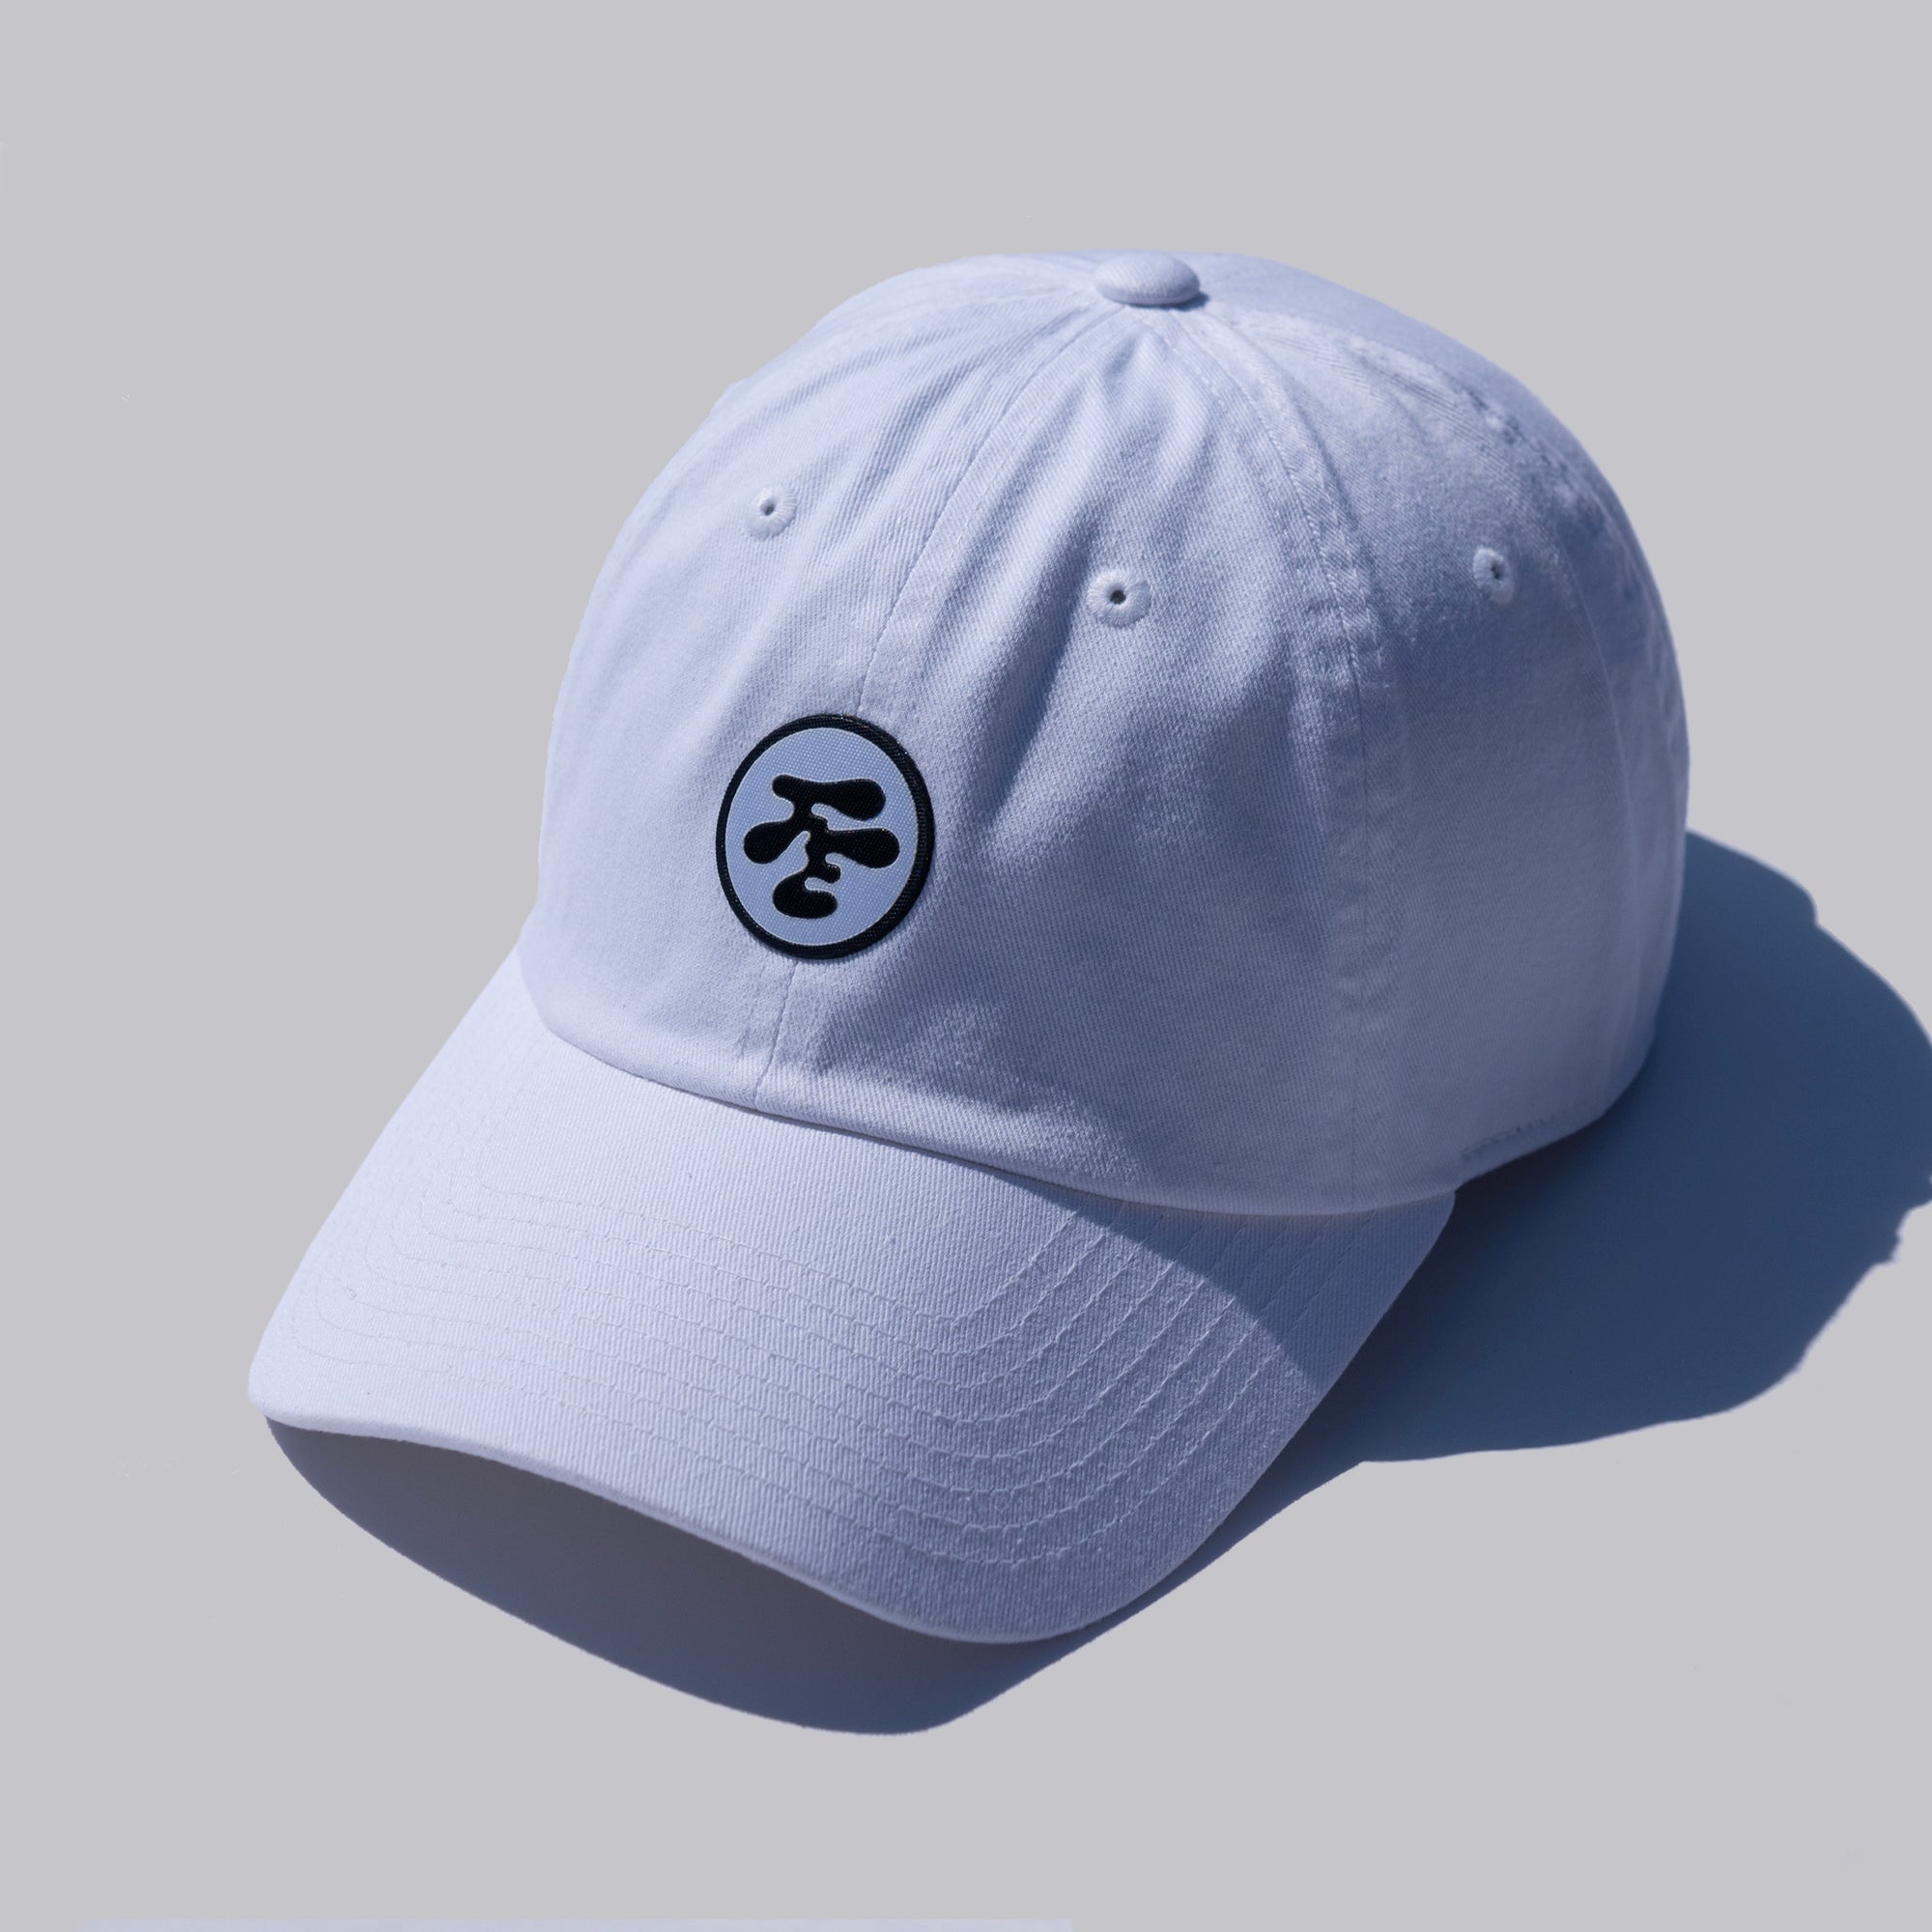 Fried Egg Golf & American Needle Patch Dad Hat - White